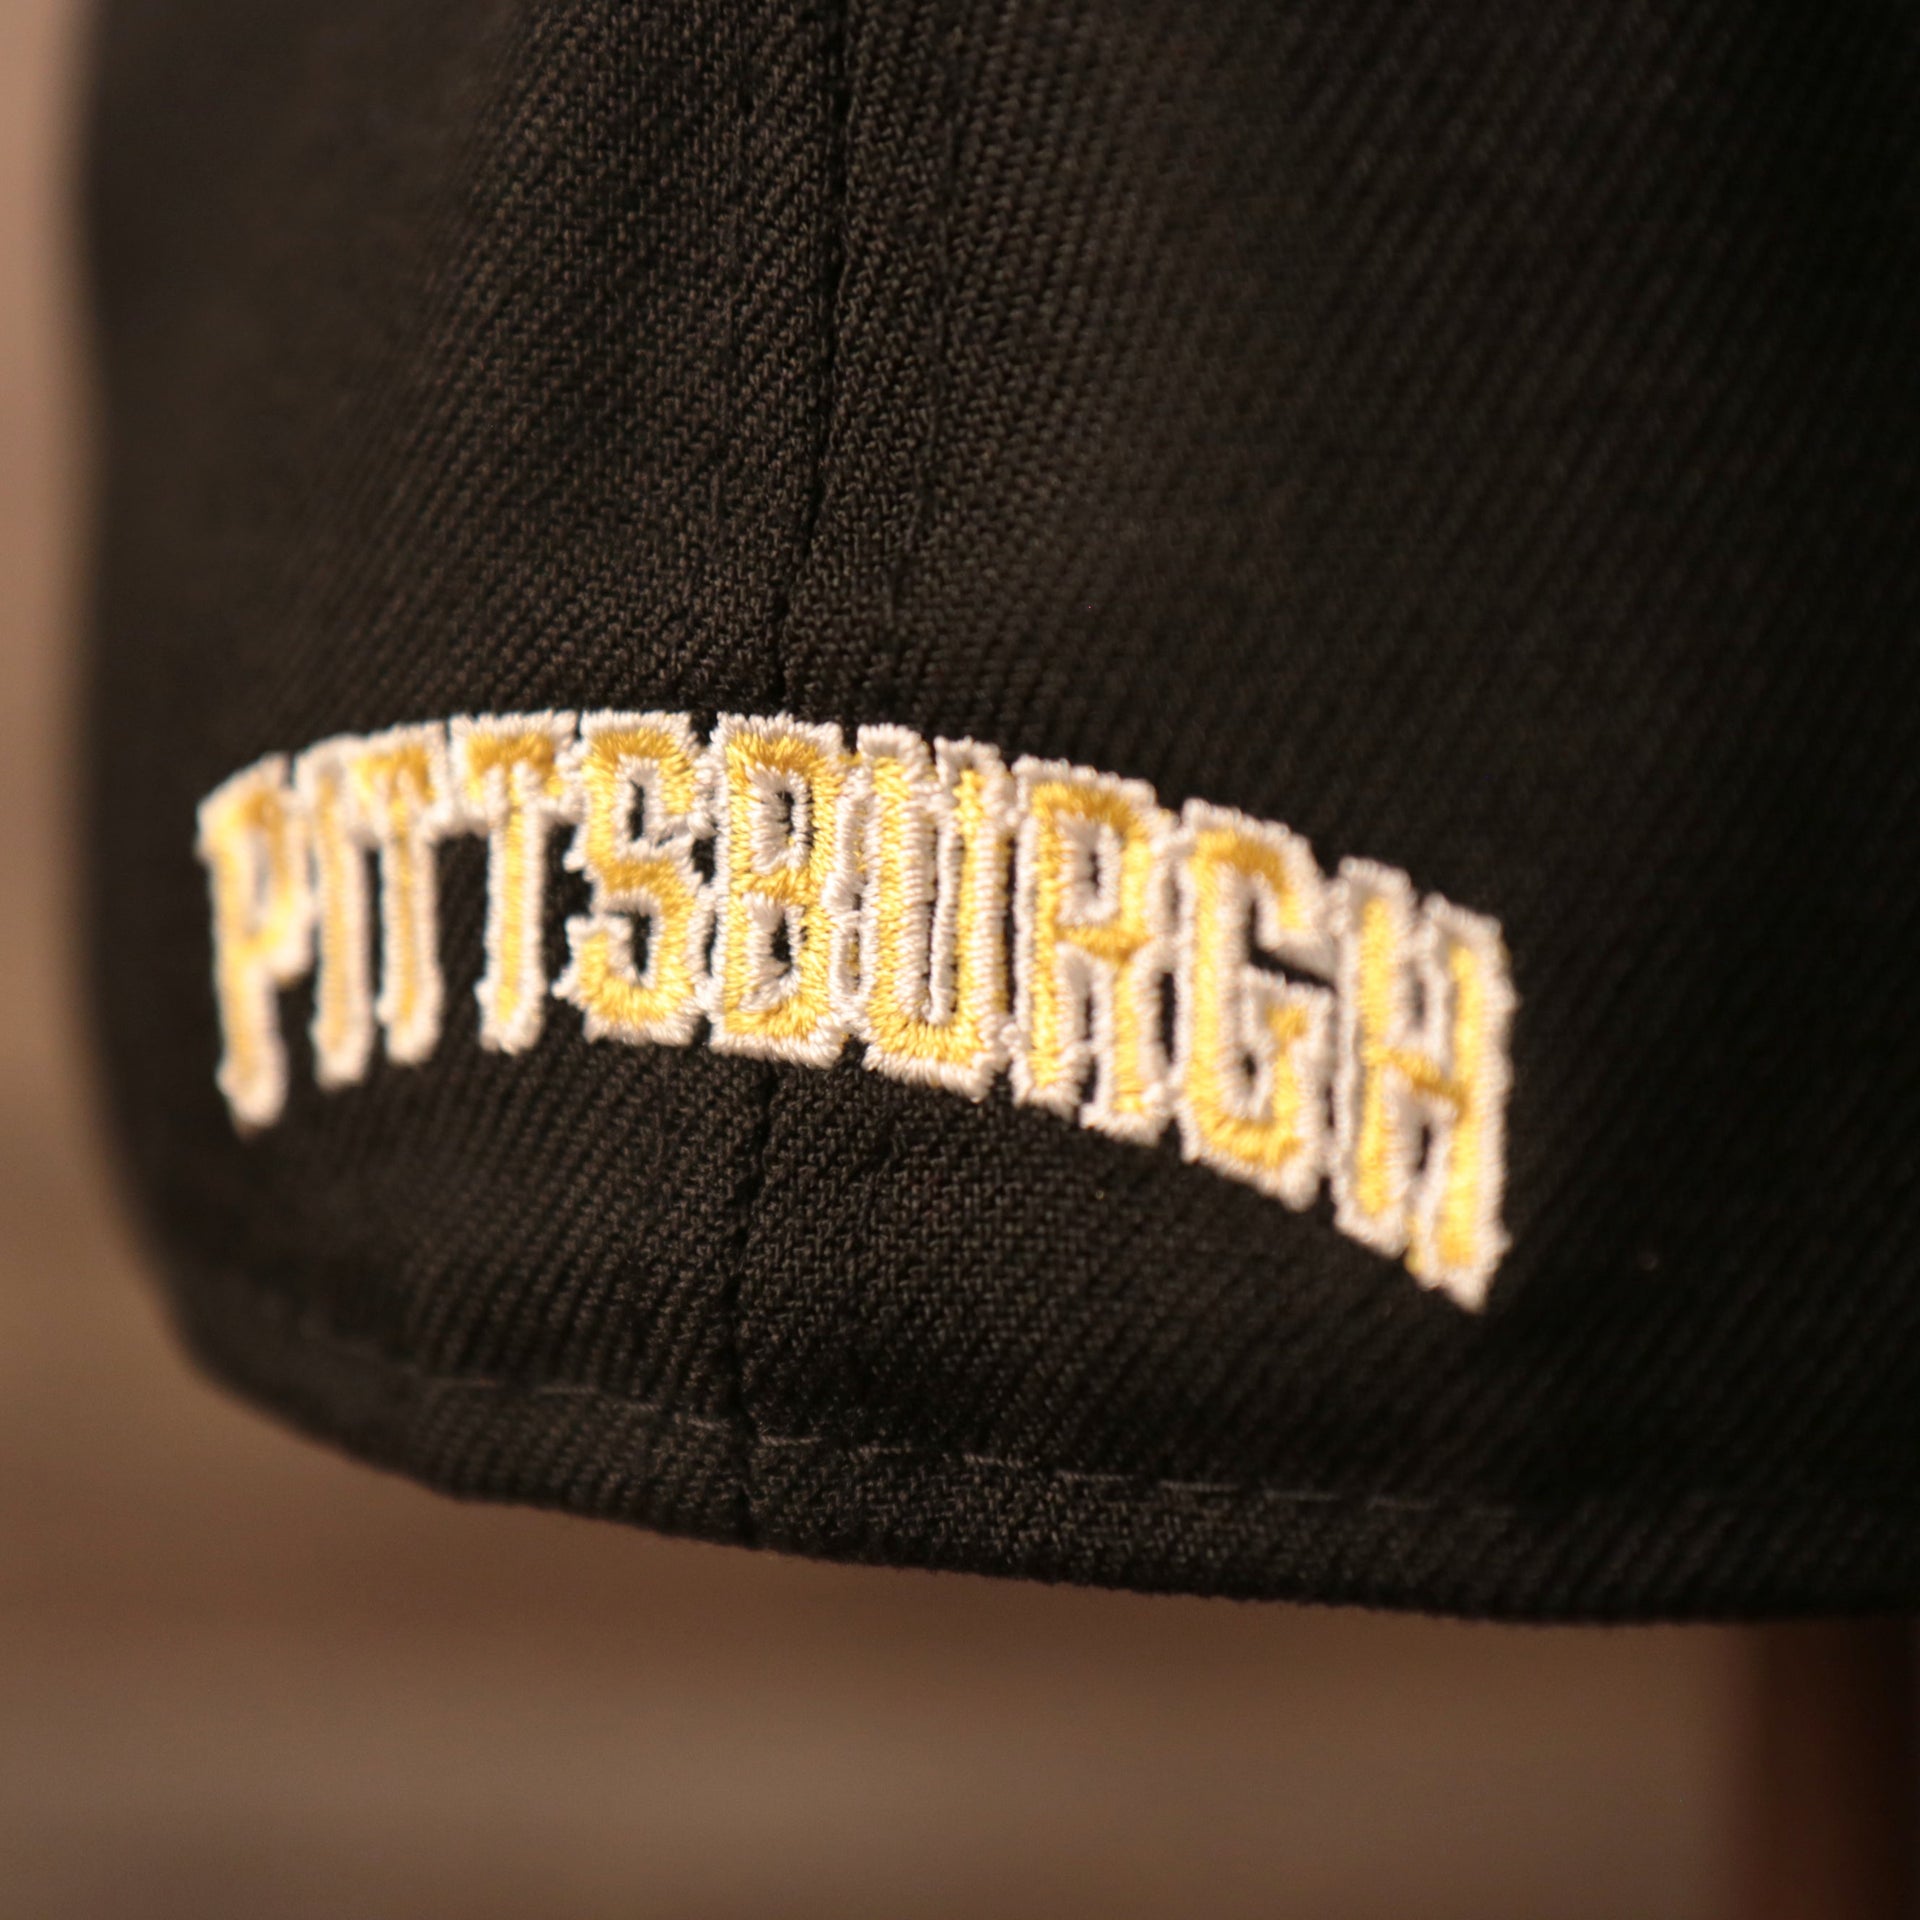 Pittsburgh written in old english arched font on the backside of the black 59fifty.